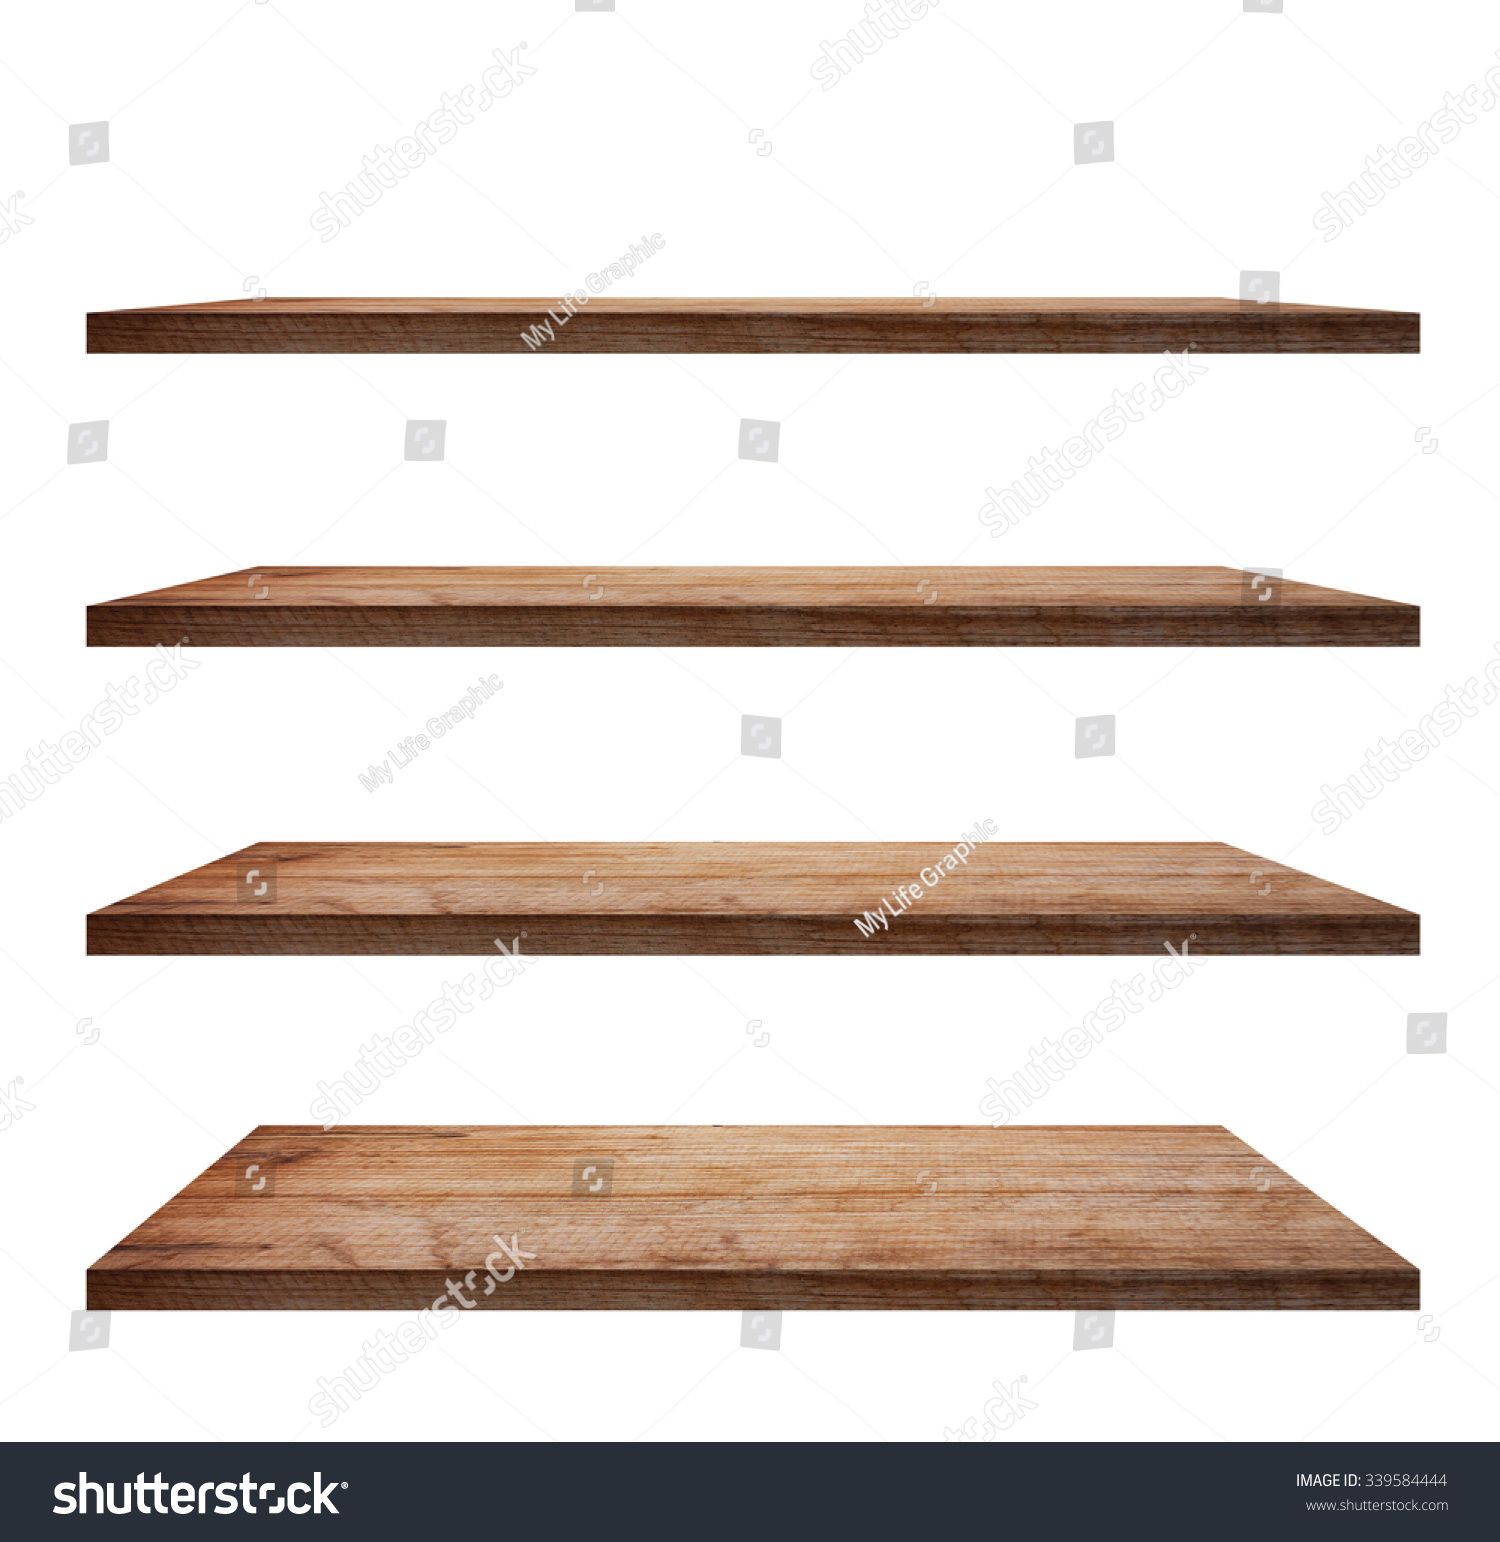 collection of wooden shelves on an isolated white background, Objects with Clipping Paths for design work #339584444